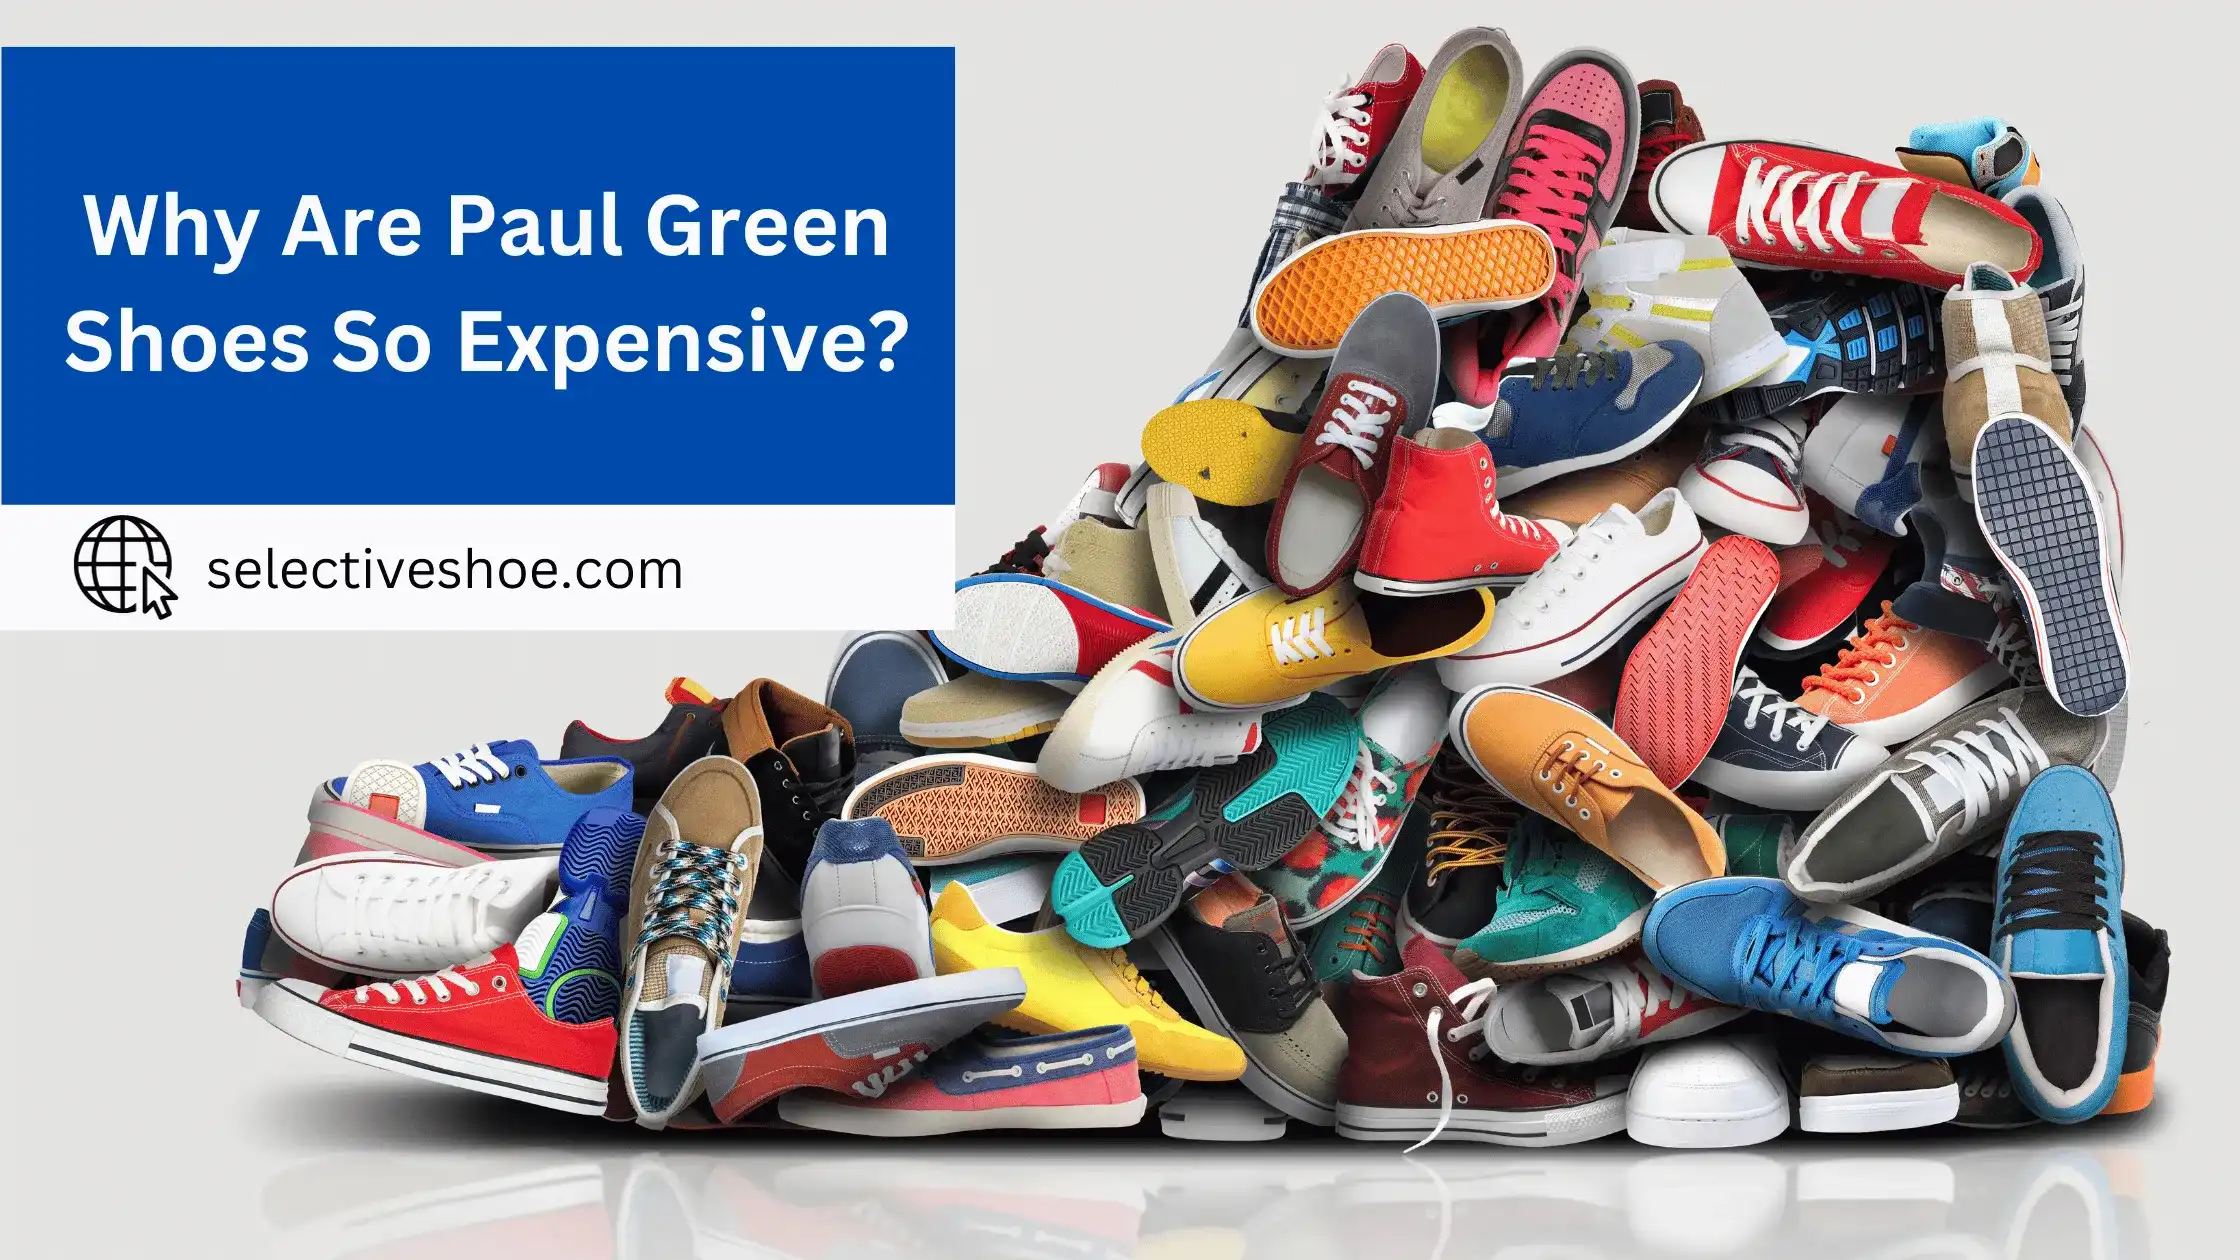 Why Are Paul Green Shoes so Expensive? Facts to Know